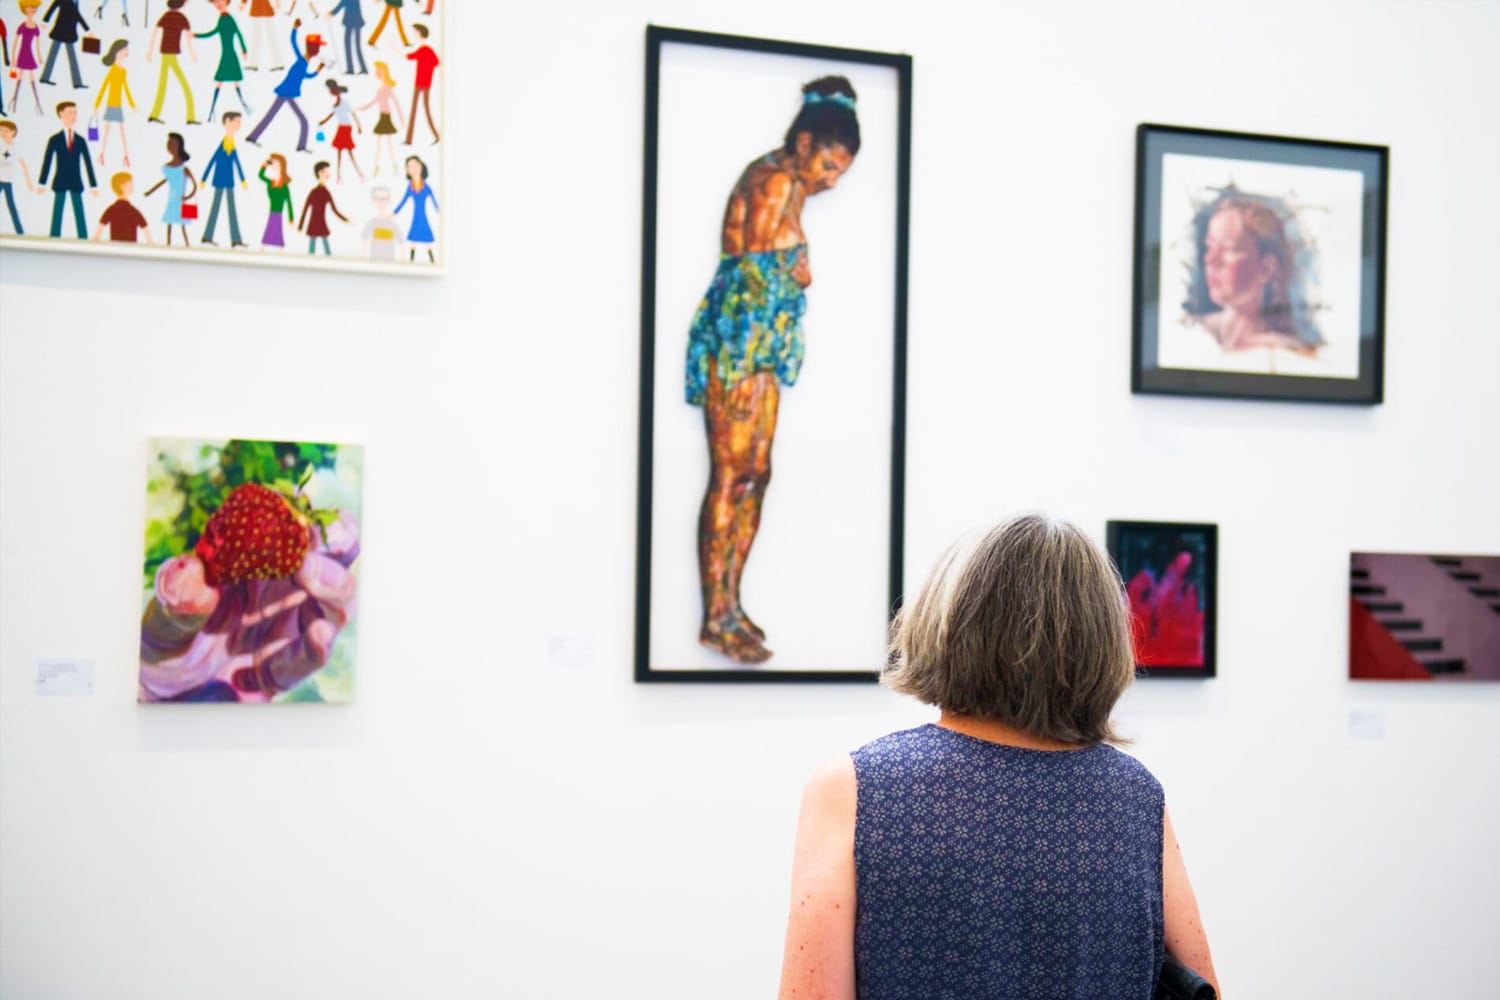 From behind, we see a woman with mid-length grey hair admiring a wall of paintings in an art gallery.